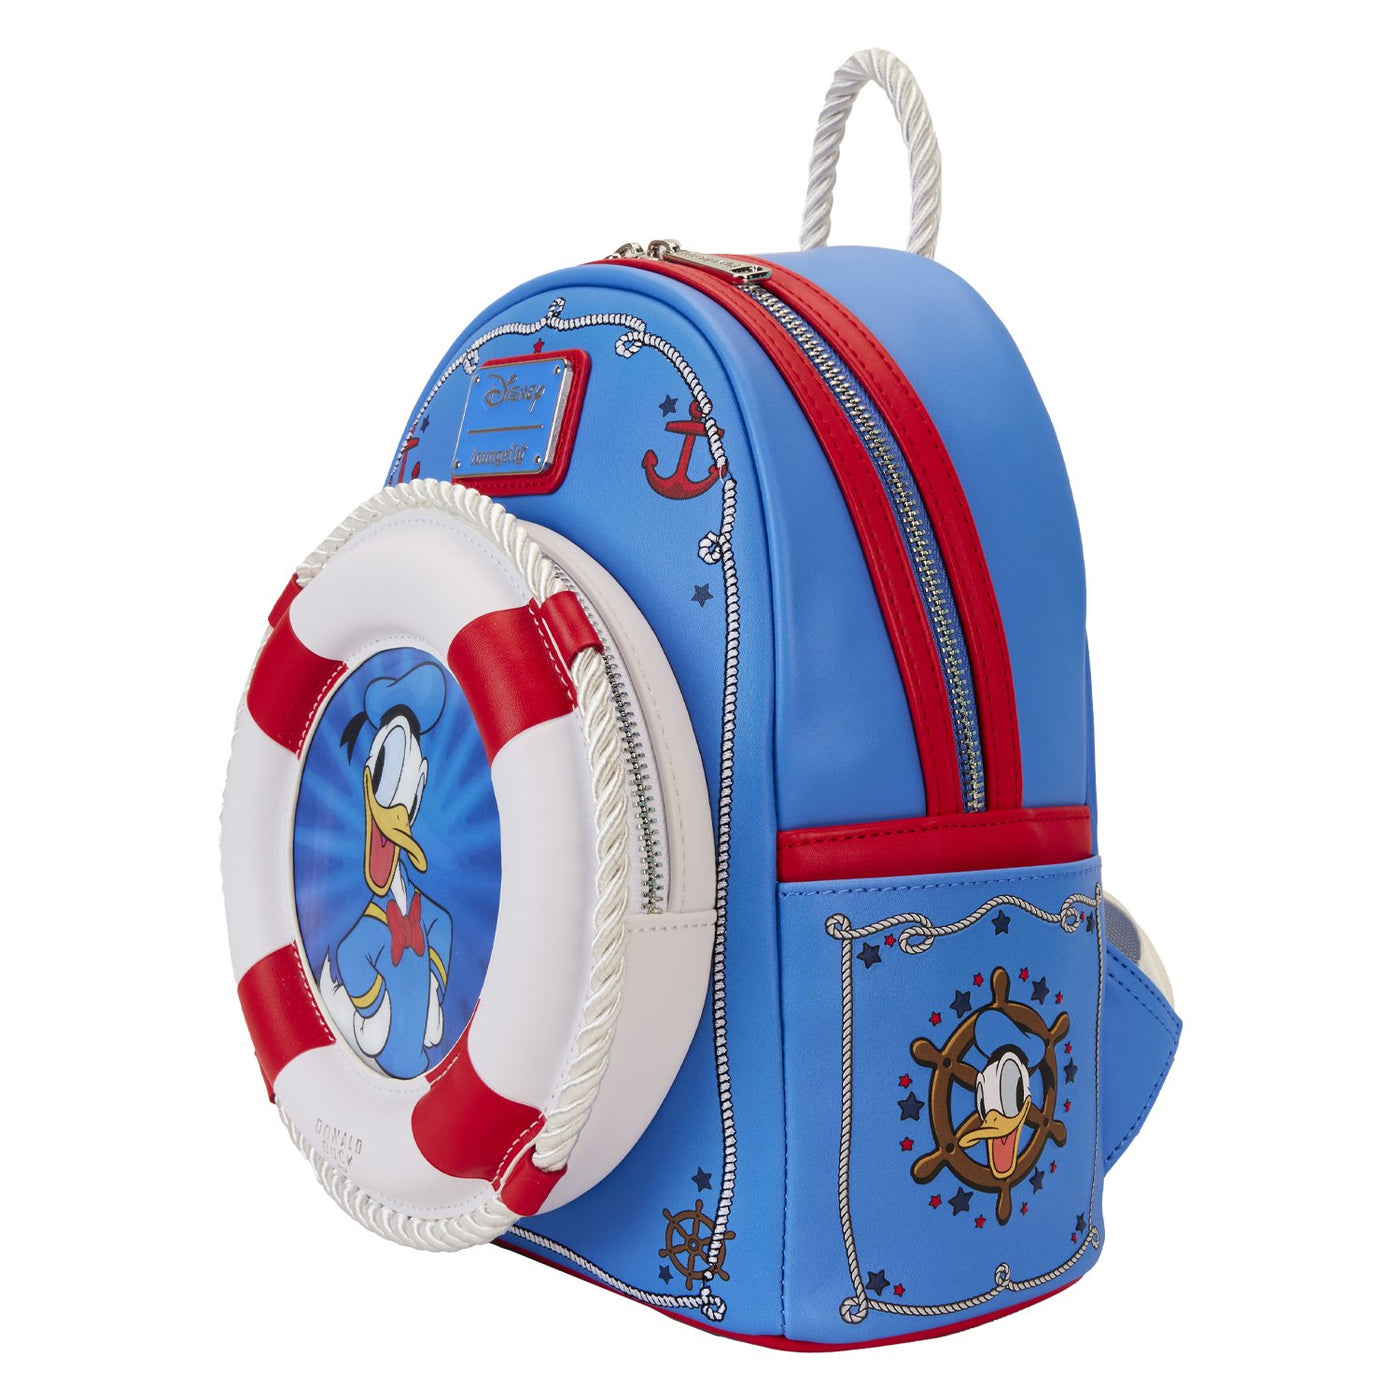 WDBK3642 - Loungefly Disney Donald Duck 90th Anniversary Mini Backpack - Alternate Side View